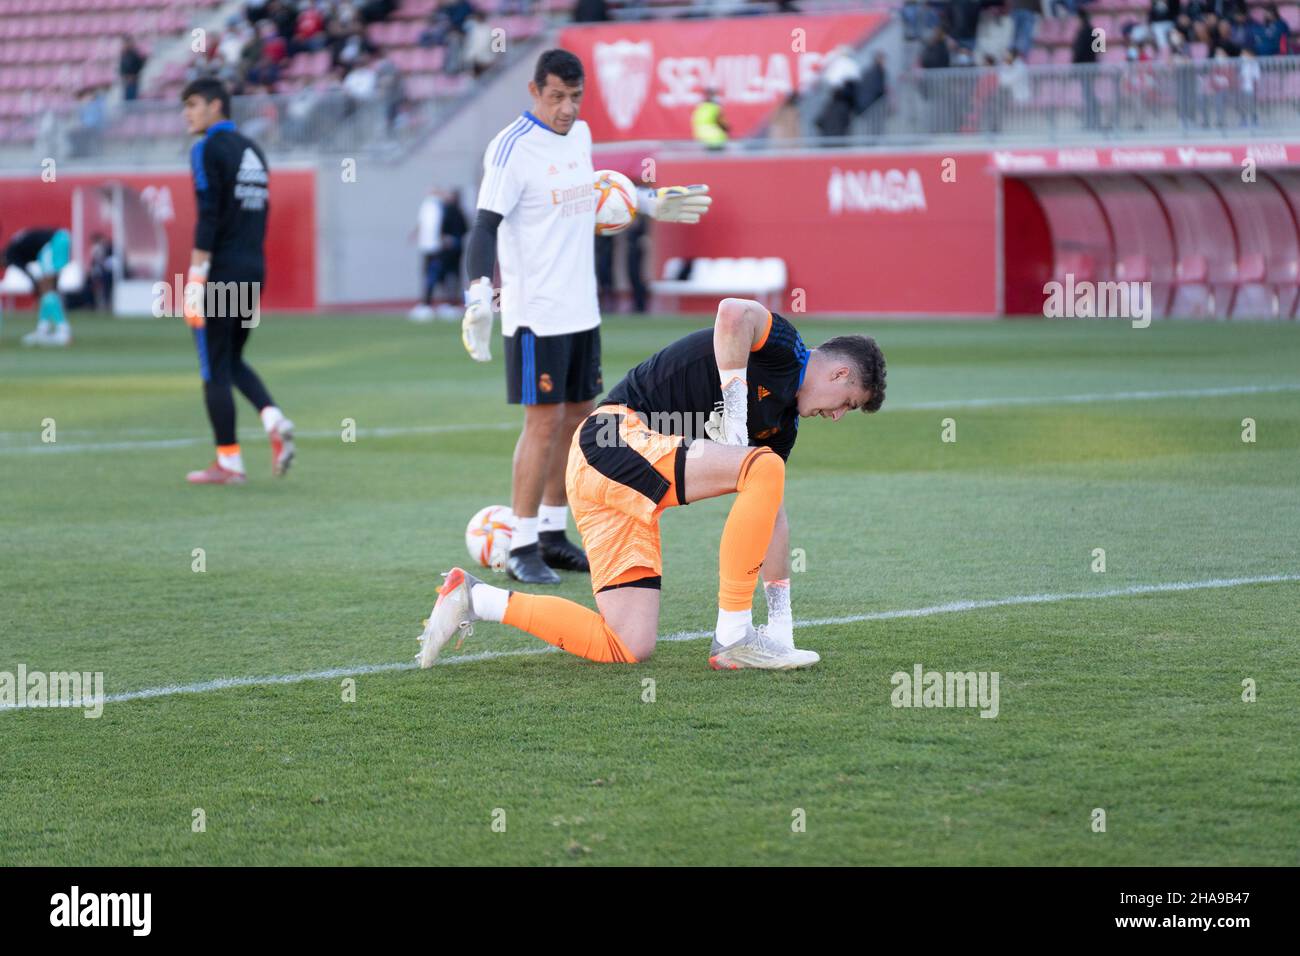 Luis López getting up from the ground after stopping a goal in training Credit: Alejandra Hidalgo/Alamy Live News Stock Photo